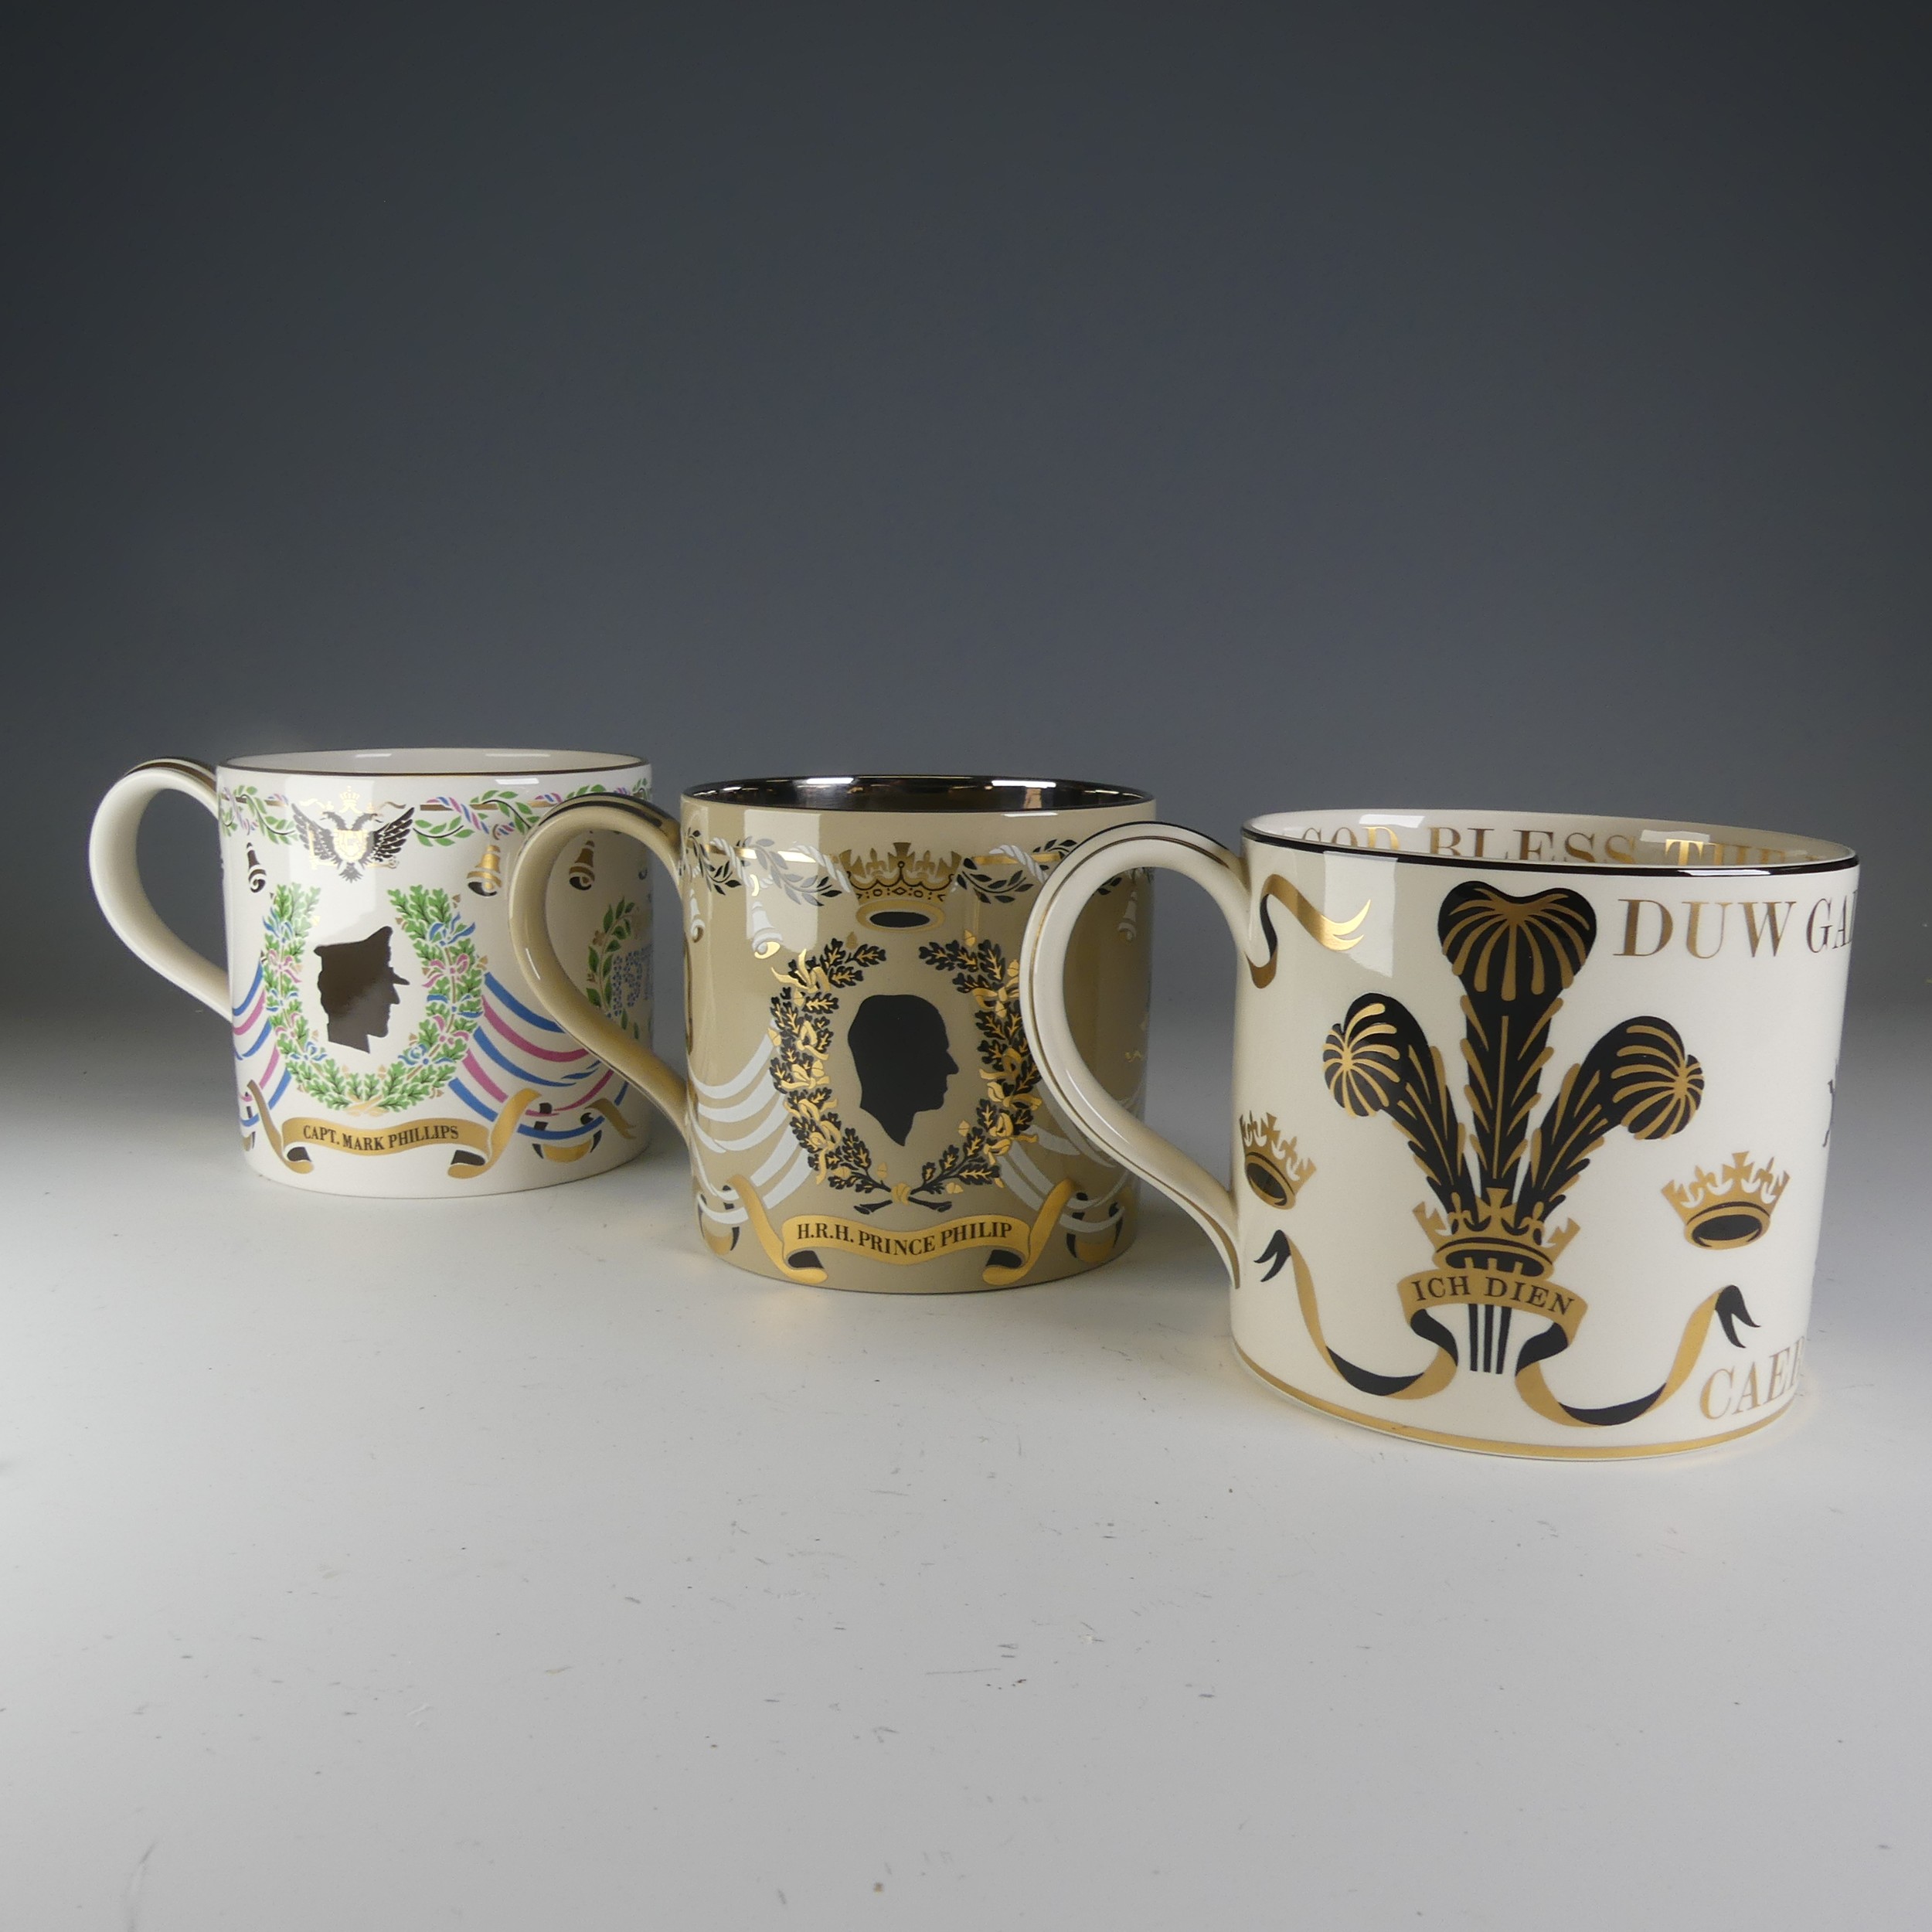 A Richard Guyatt for Wedgwood Commemorative Mug, commemorating the marriage of Princess Anne and